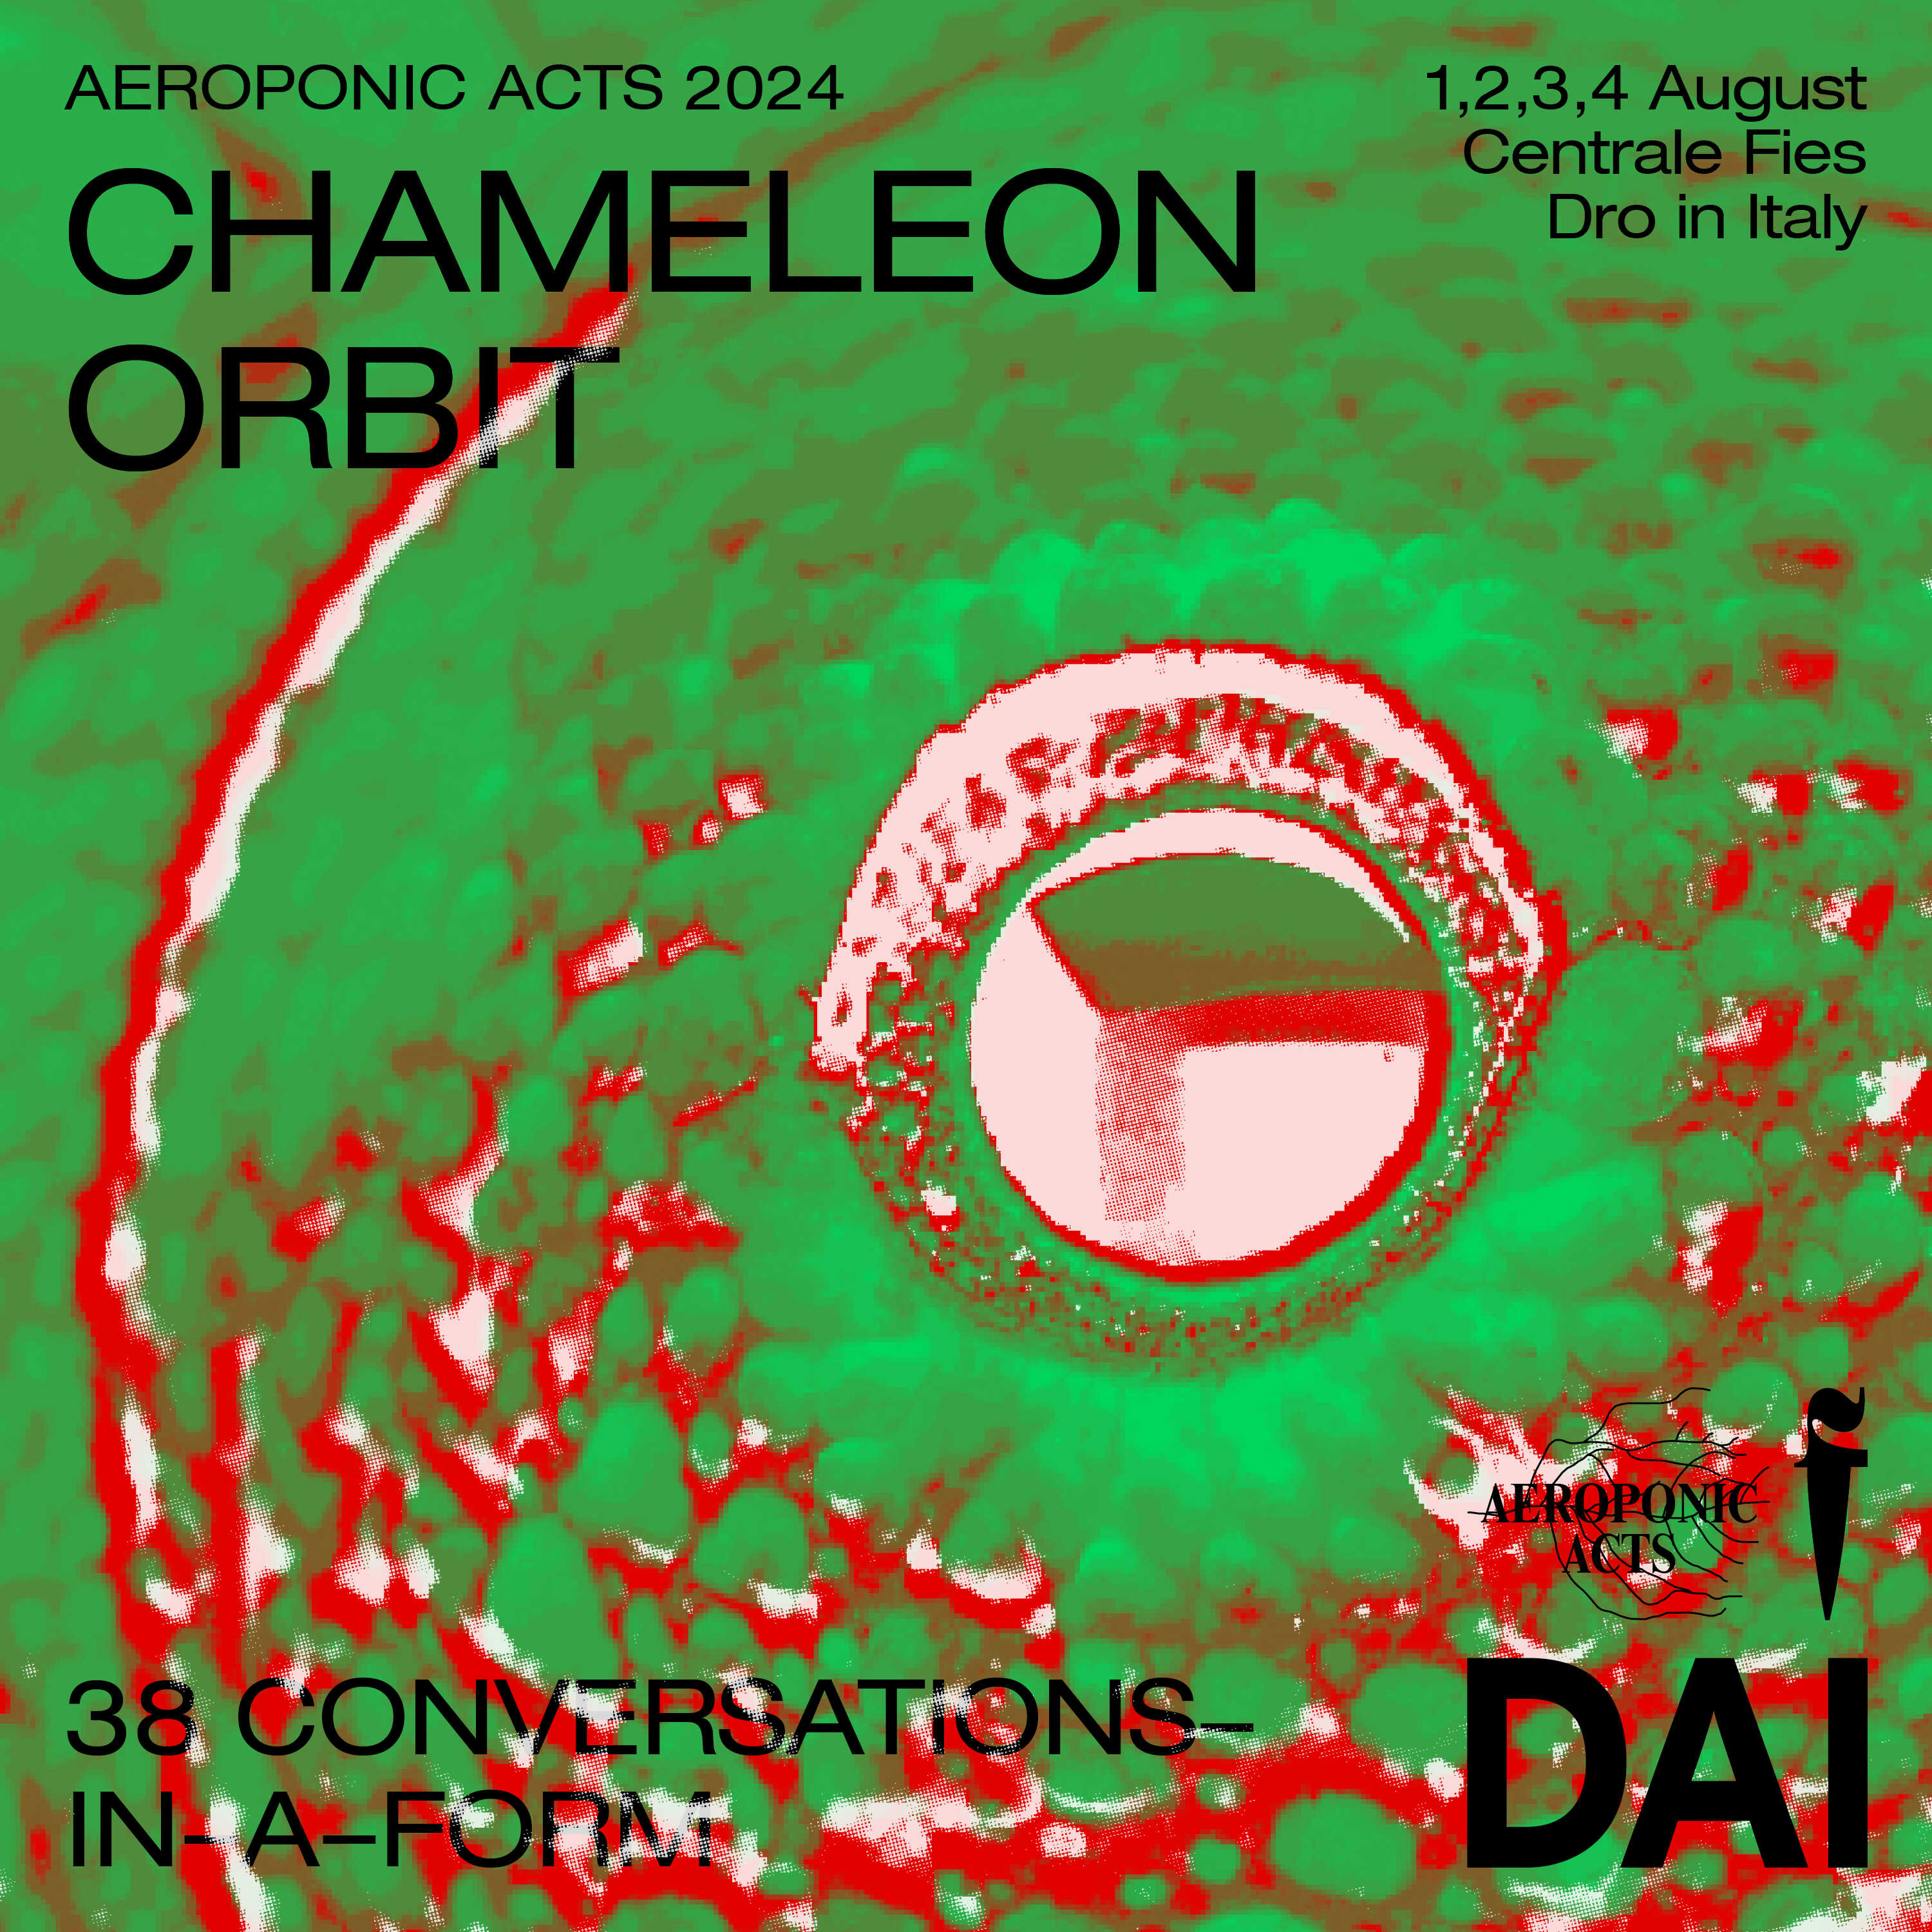 Chameleon Orbit - AEROPONIC ACTS 2024  page banner (version 16 July 2024)